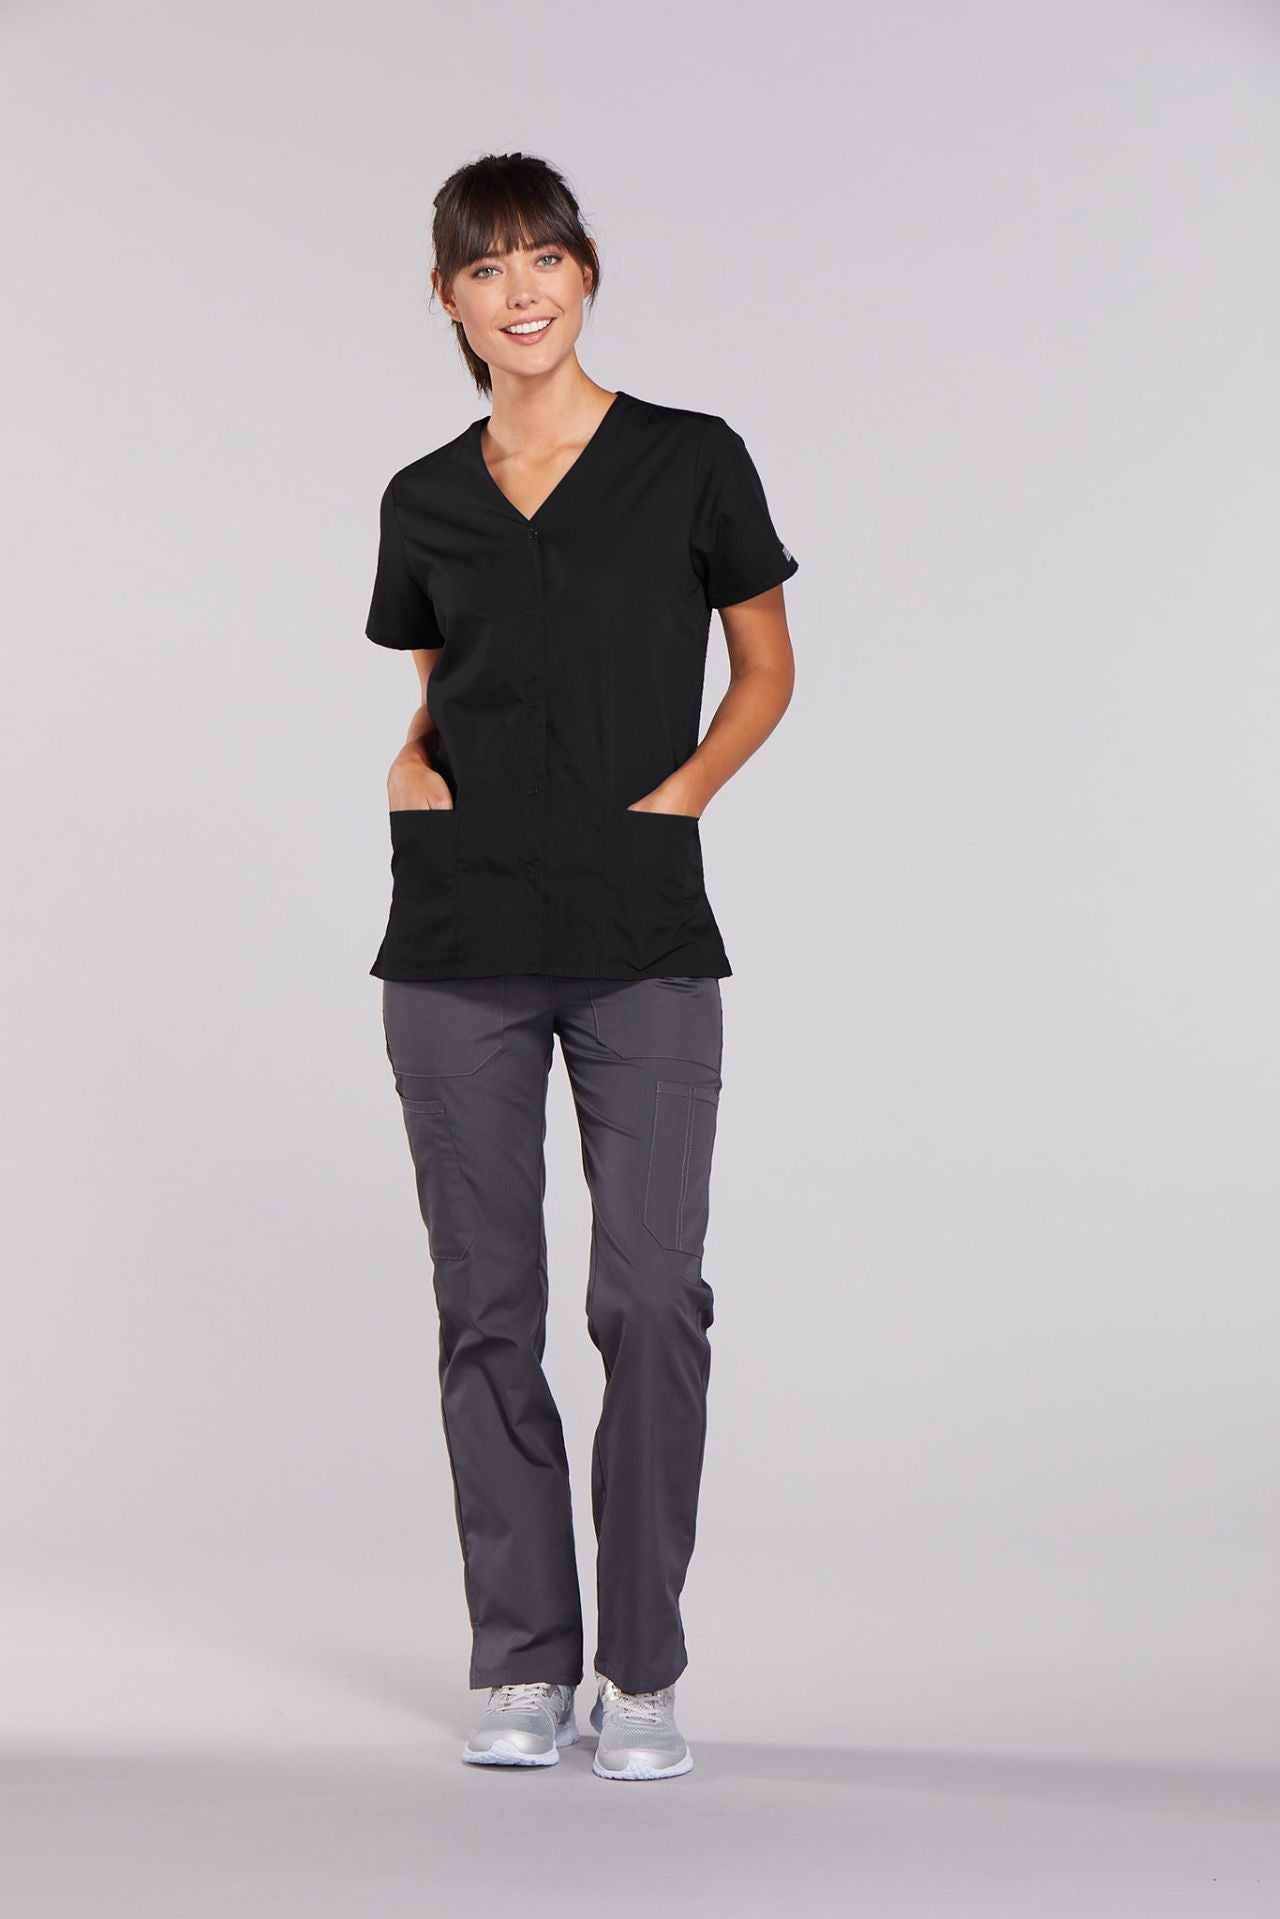 CLEARANCE Snap Front V-Neck Top